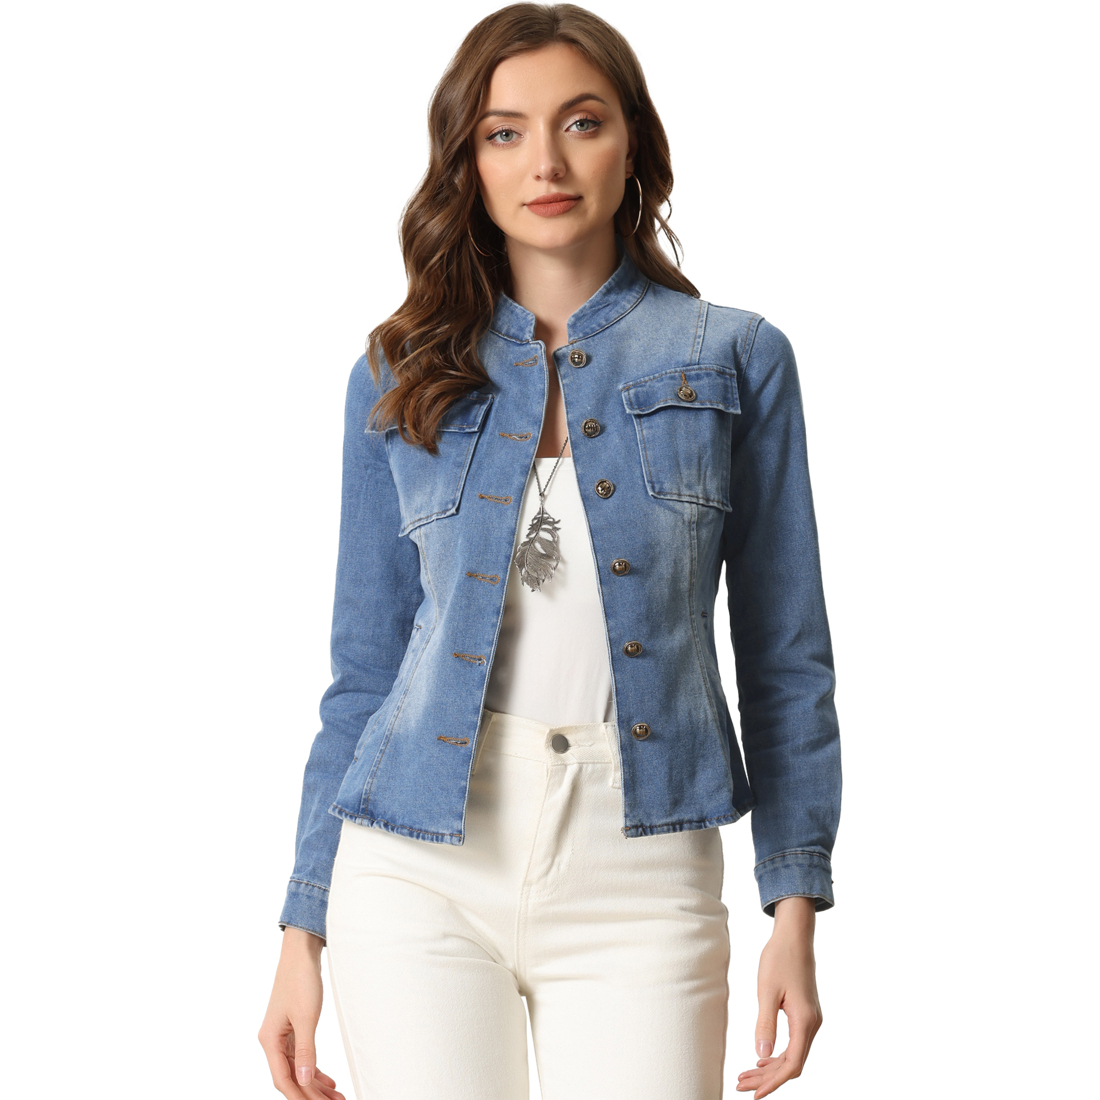 Unique Bargains Casual Denim Jacket for Women's Classic Stand Collar Long Sleeve Jean Jackets